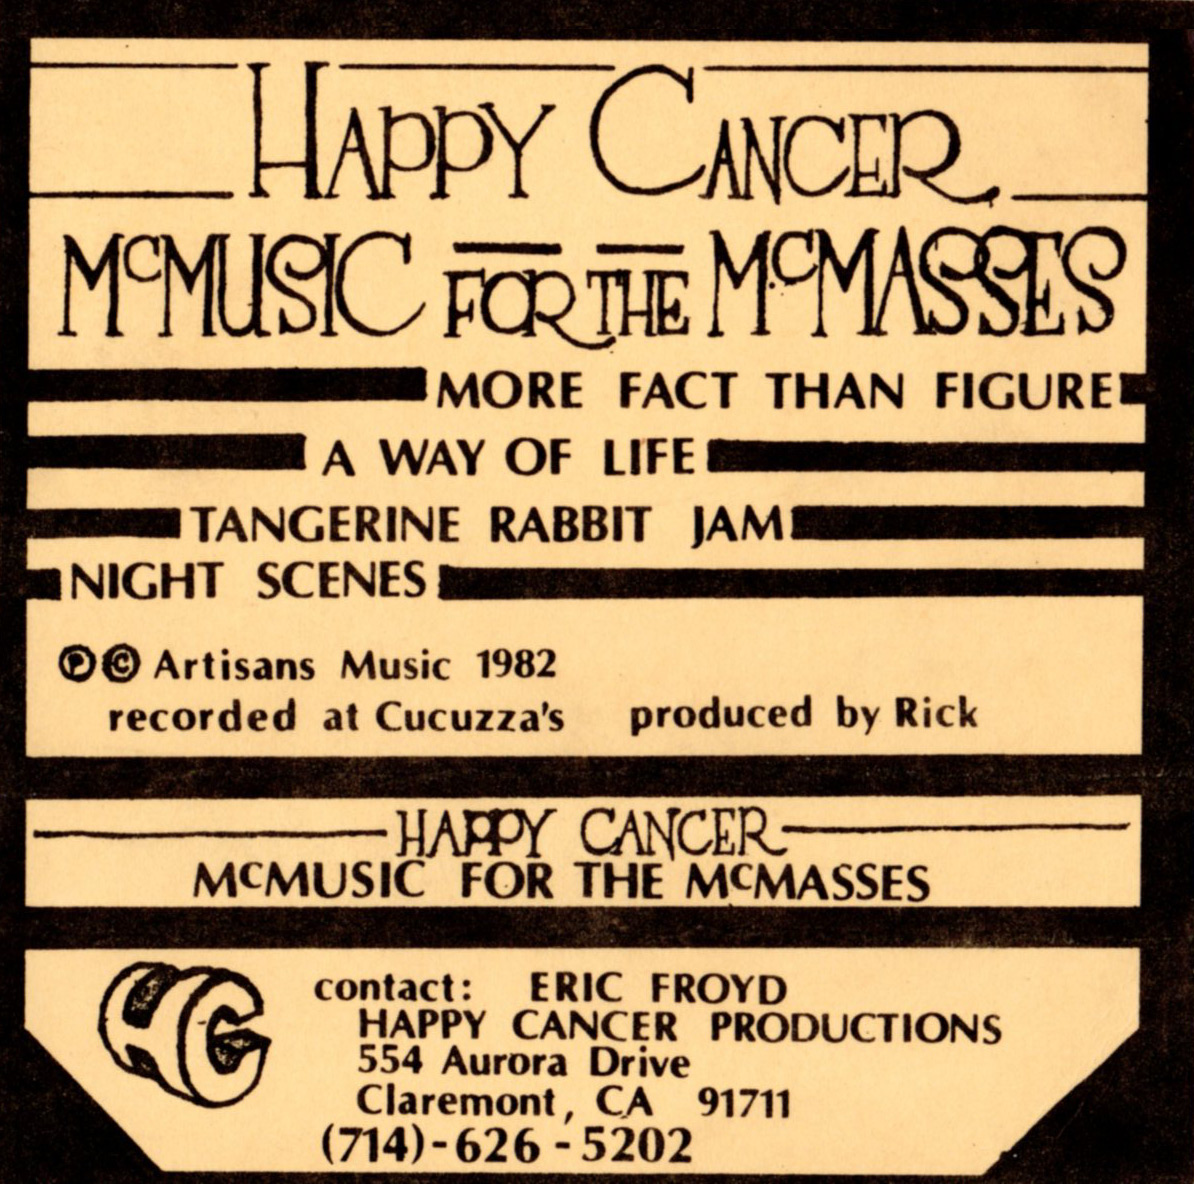 Happy Cancer: McMusic for the McMaesses